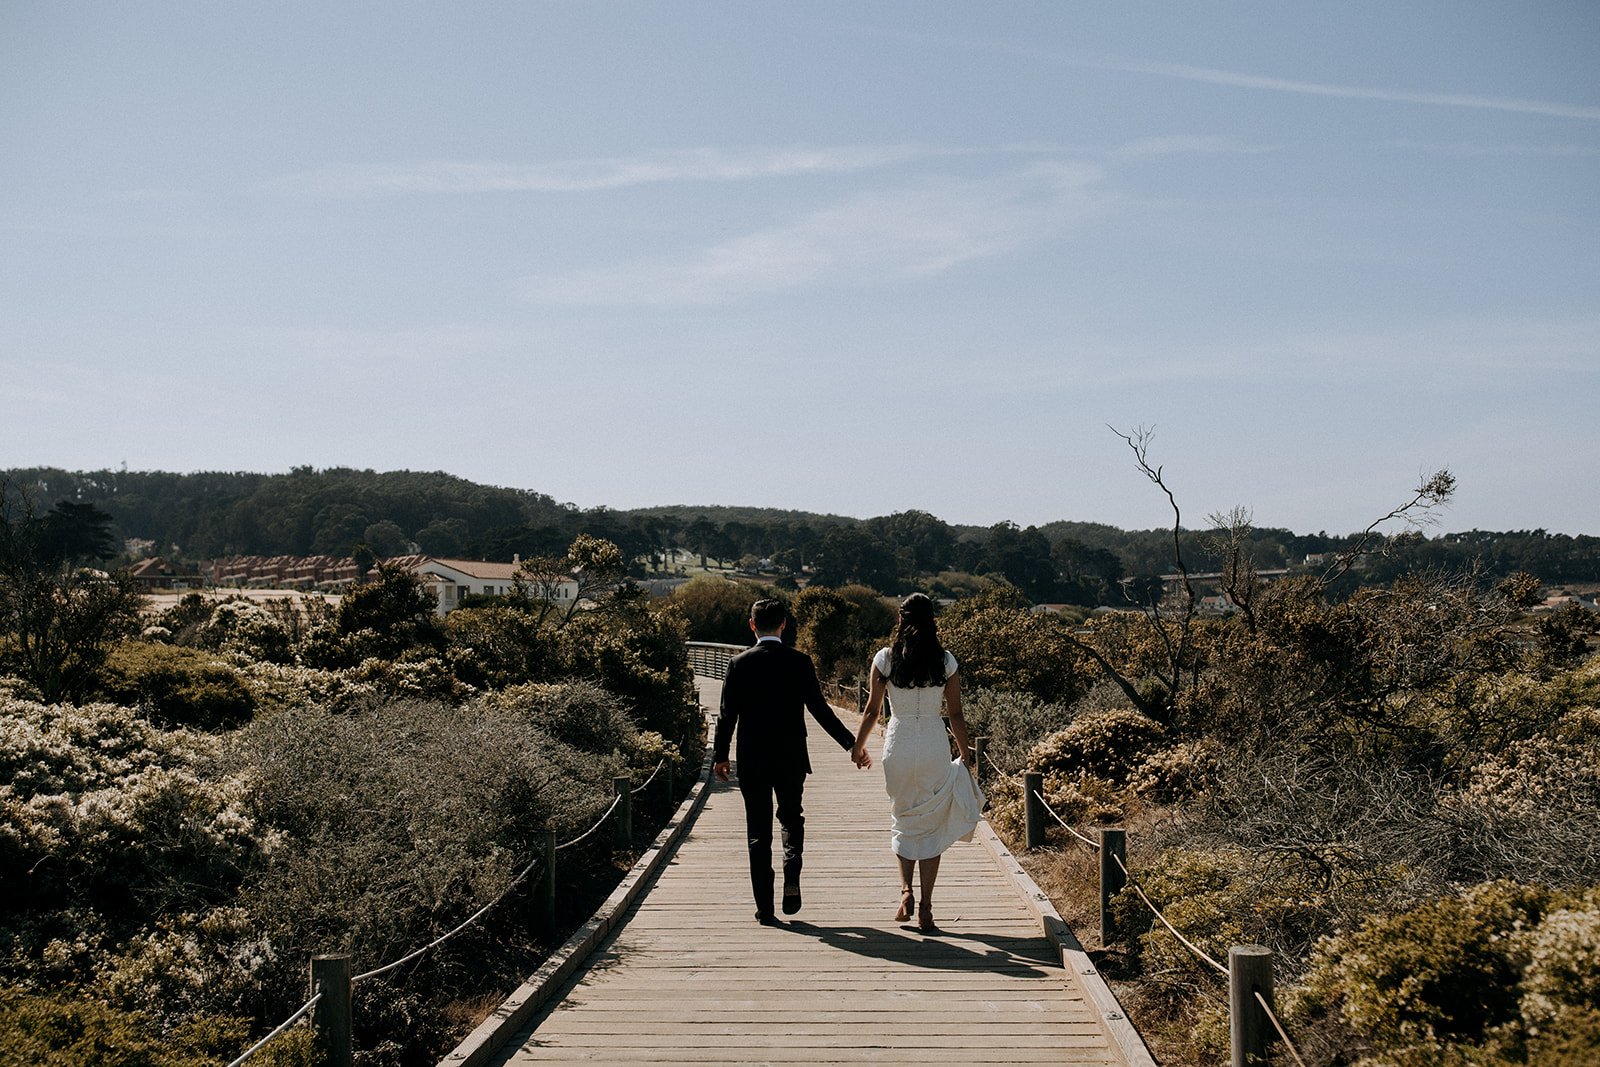  bride and groom walking on a board walk with foliage surrounding them  